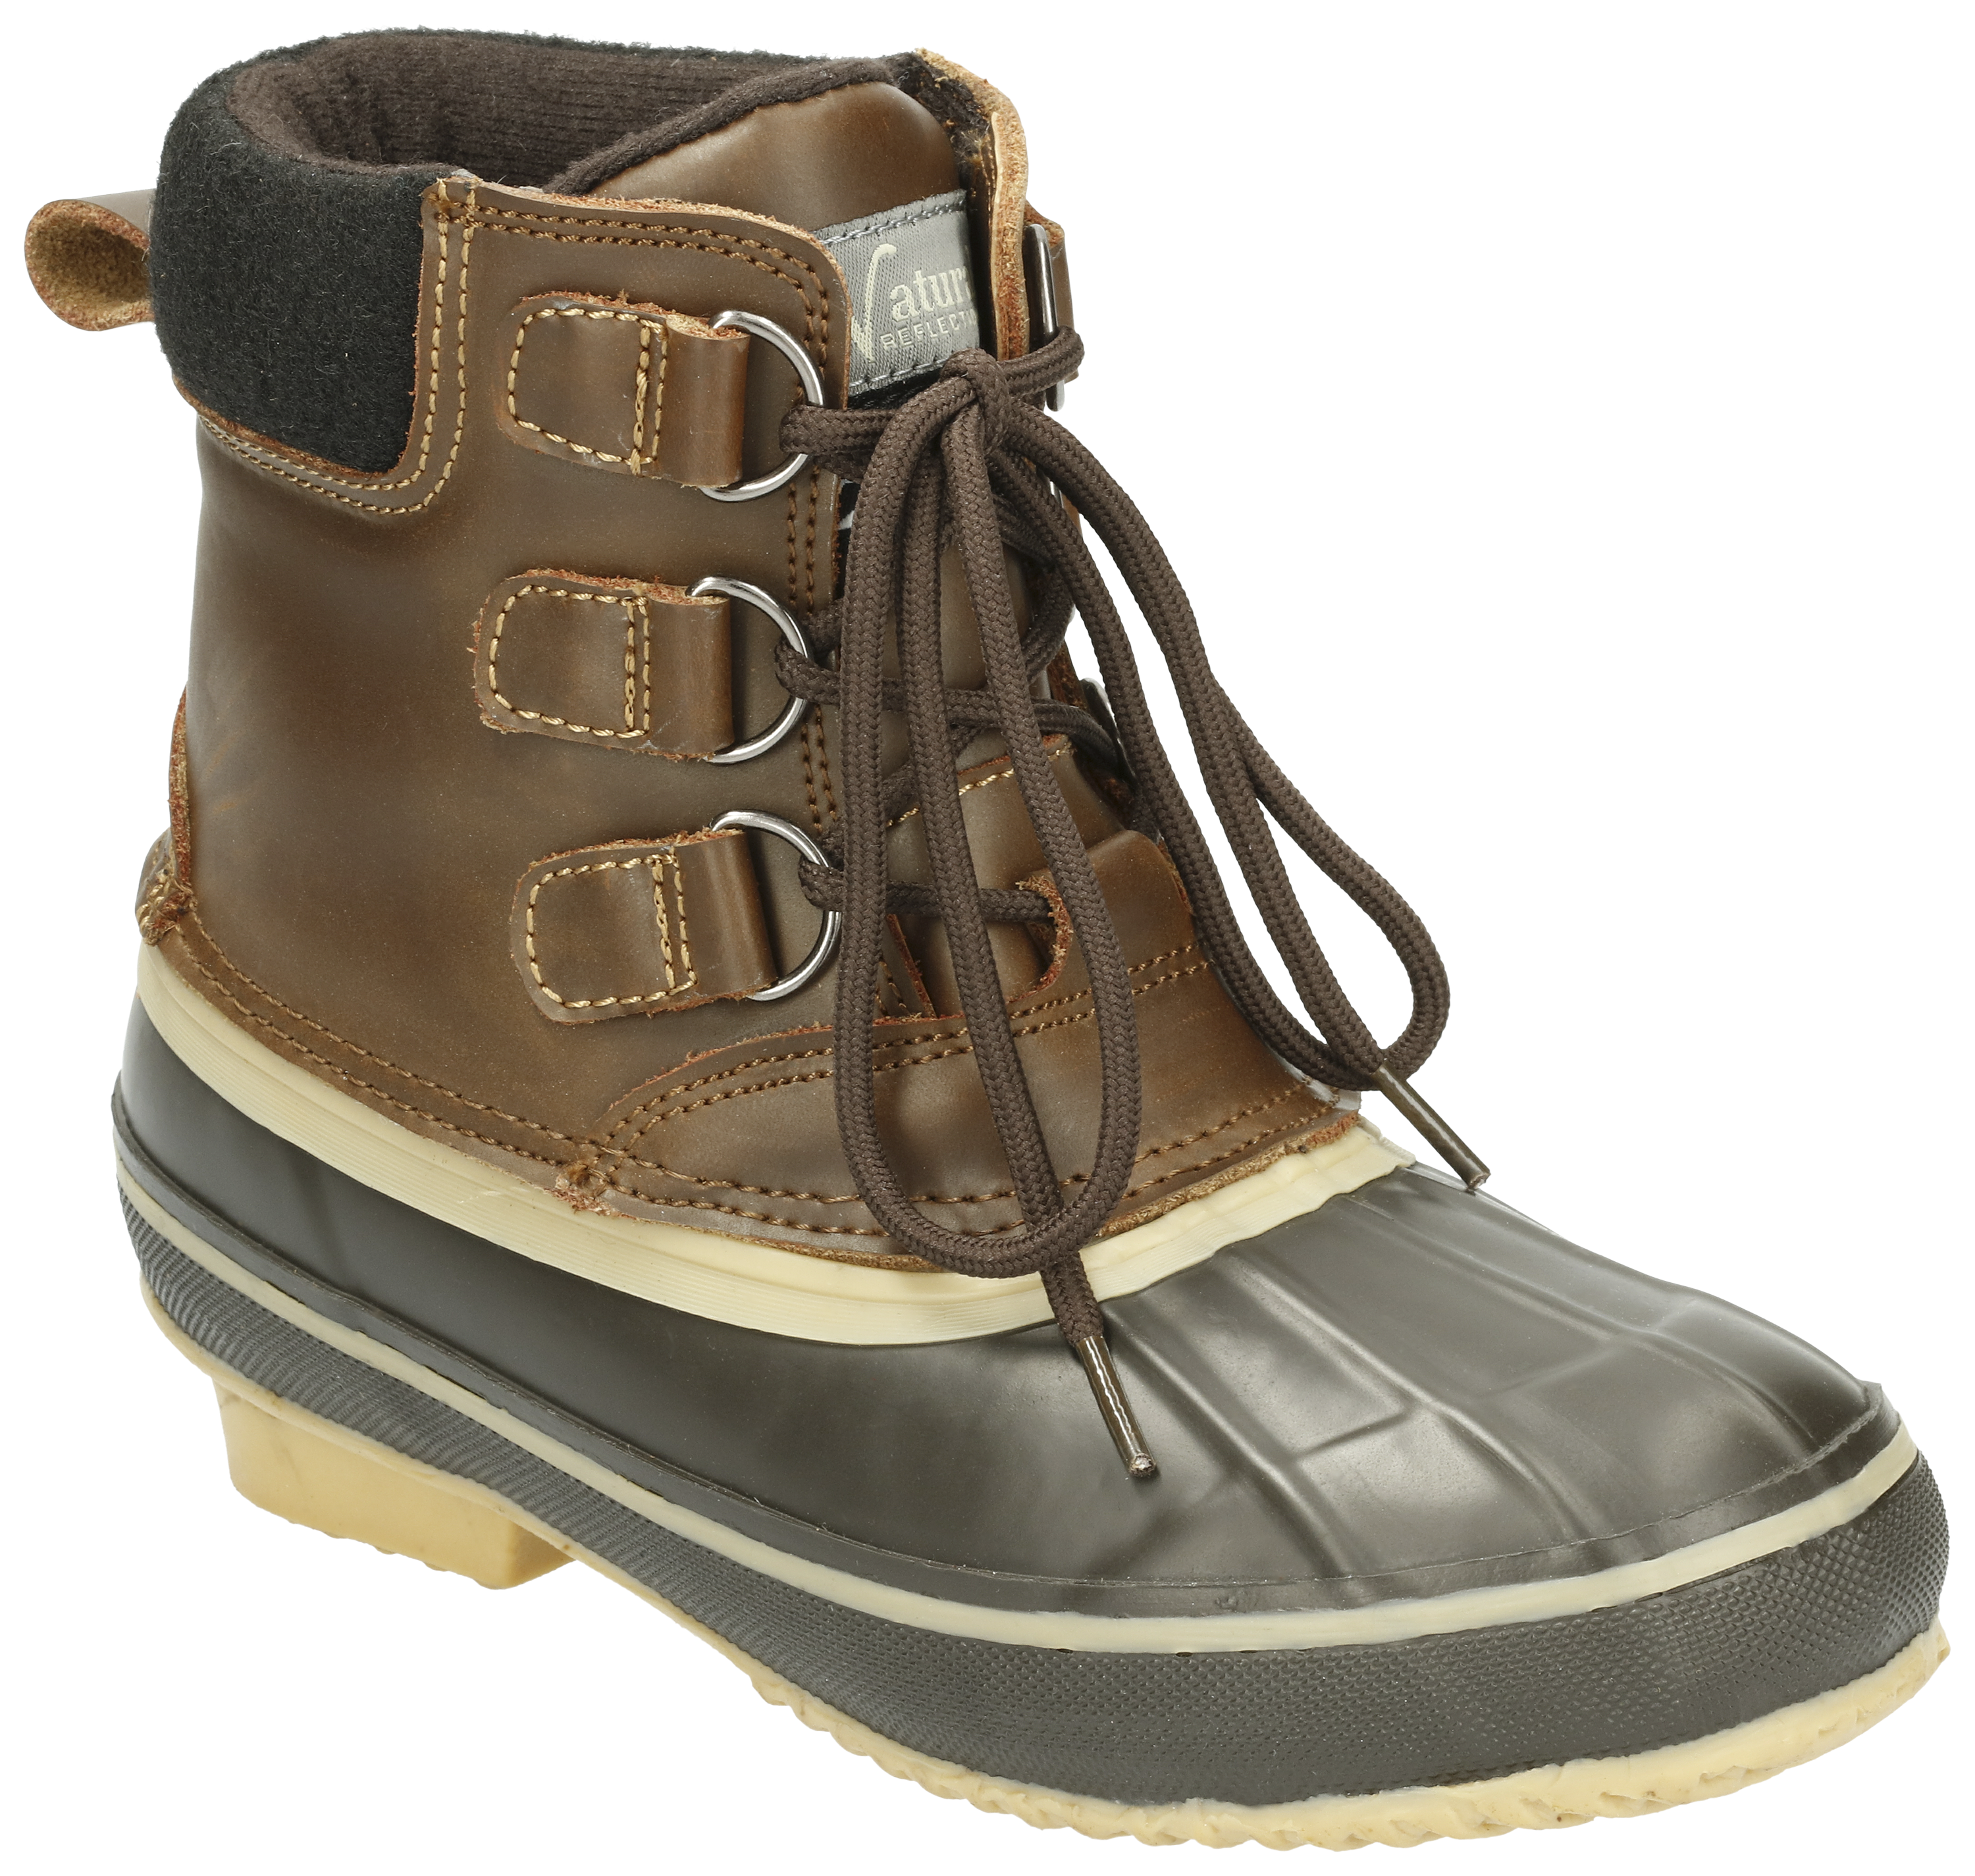 Natural Reflections Glazer Duc Boots for Ladies - Brown - 8M